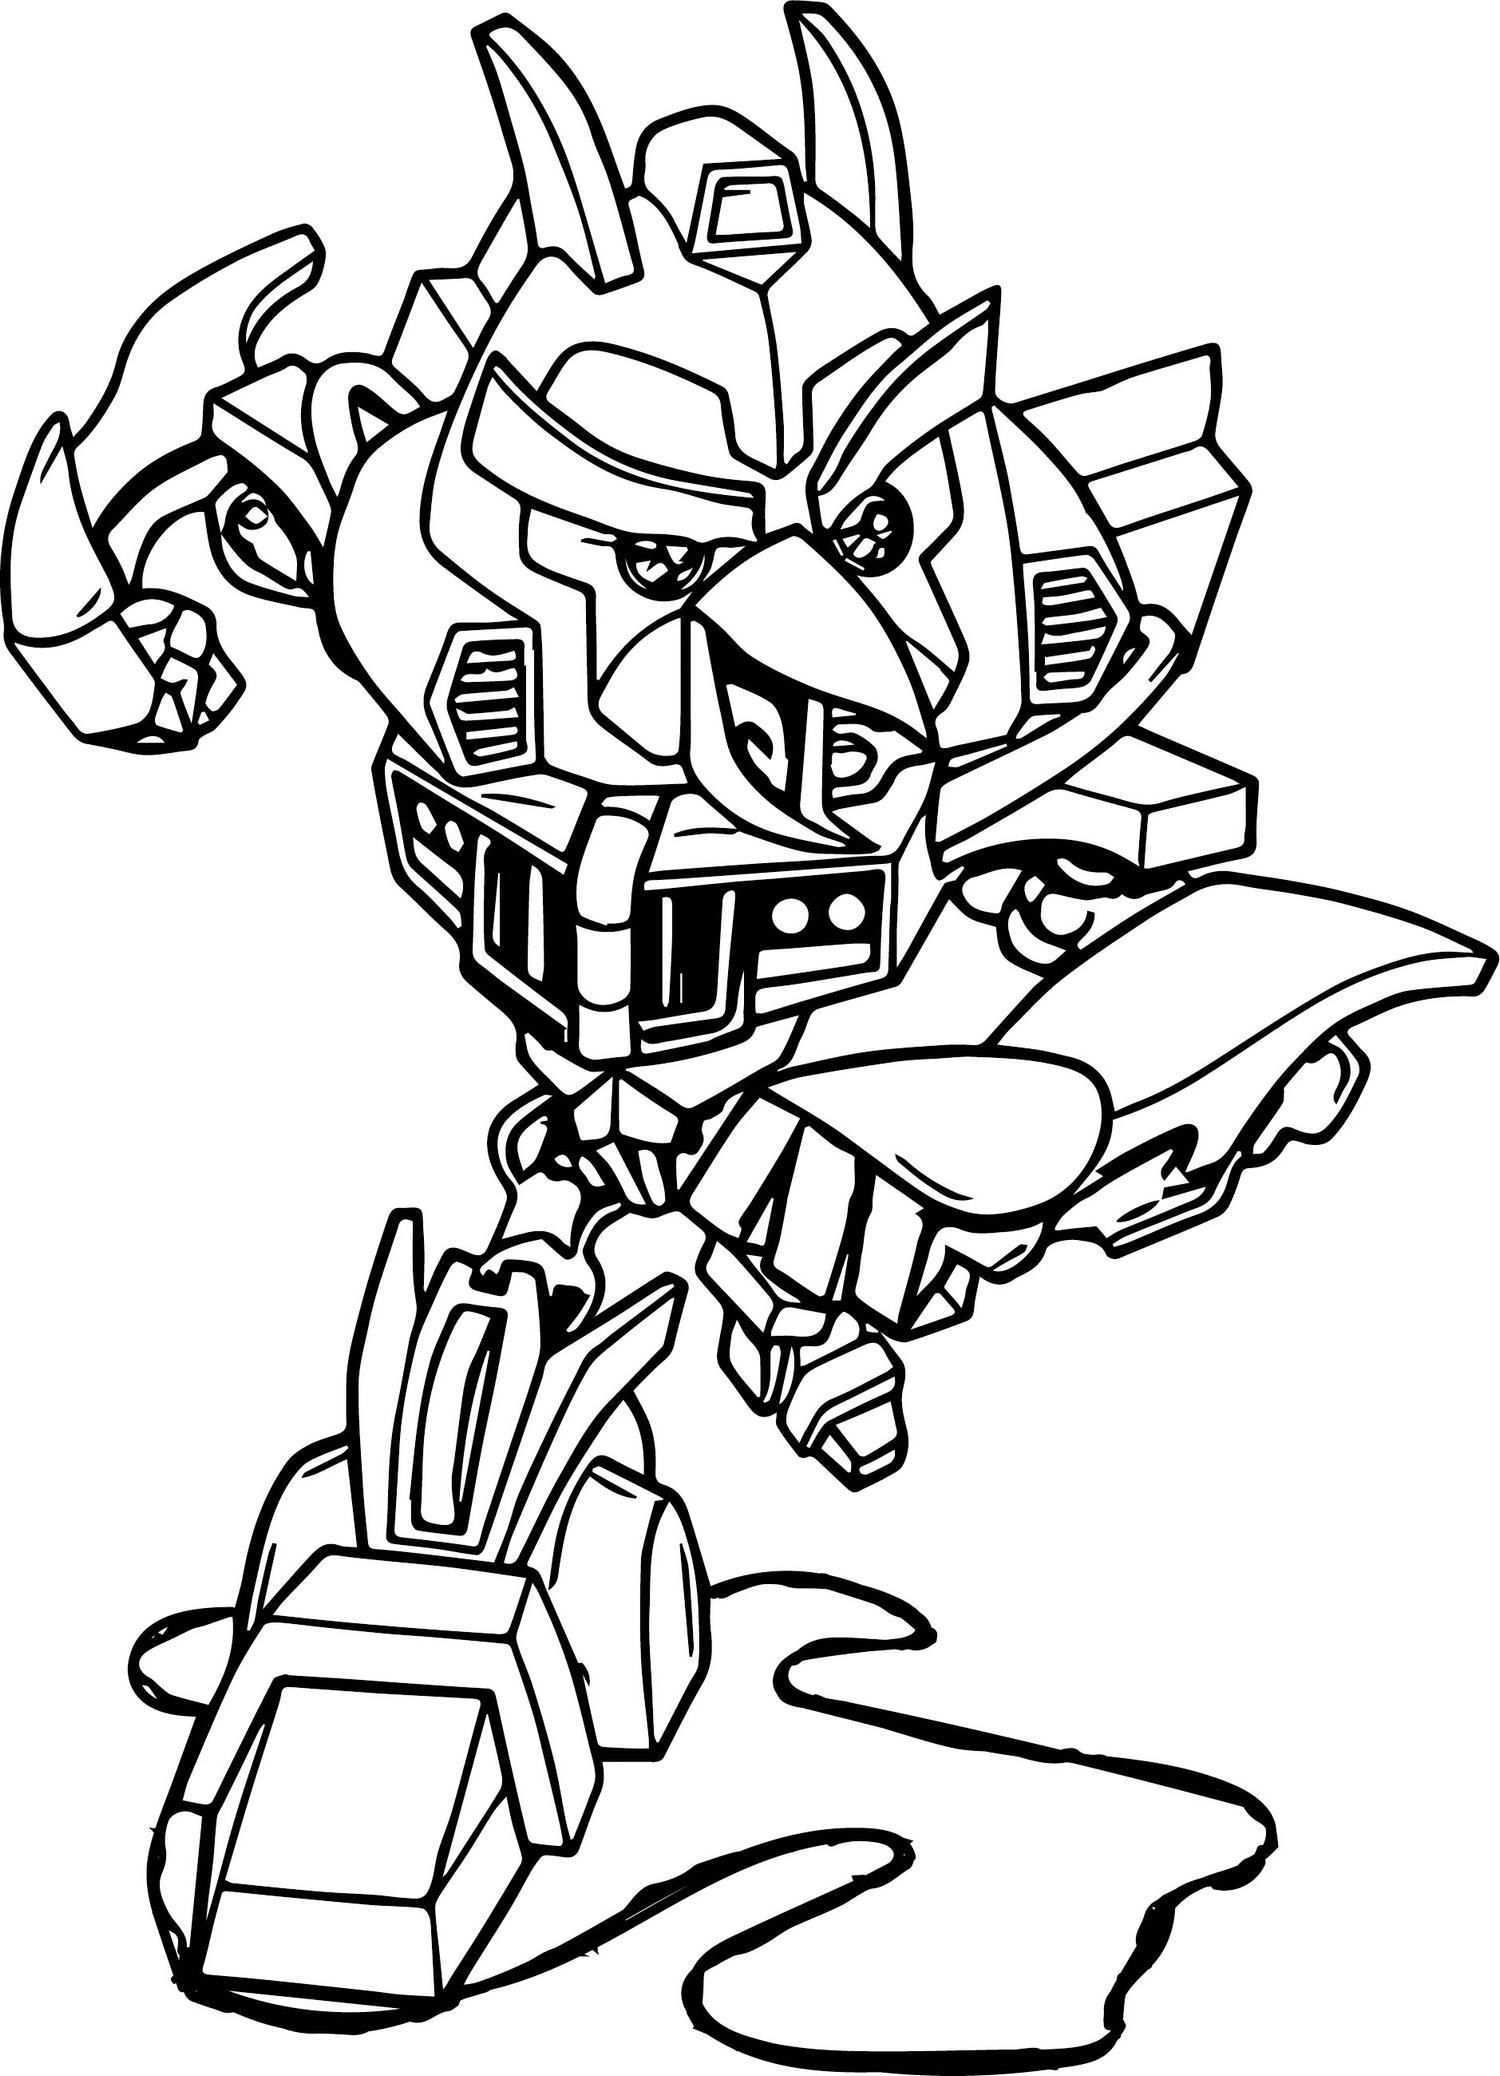 Angry Bird Transformers Bumblebee Coloring Sheet Bird Coloring Pages Bee Coloring Pages Dinosaur Coloring Pages